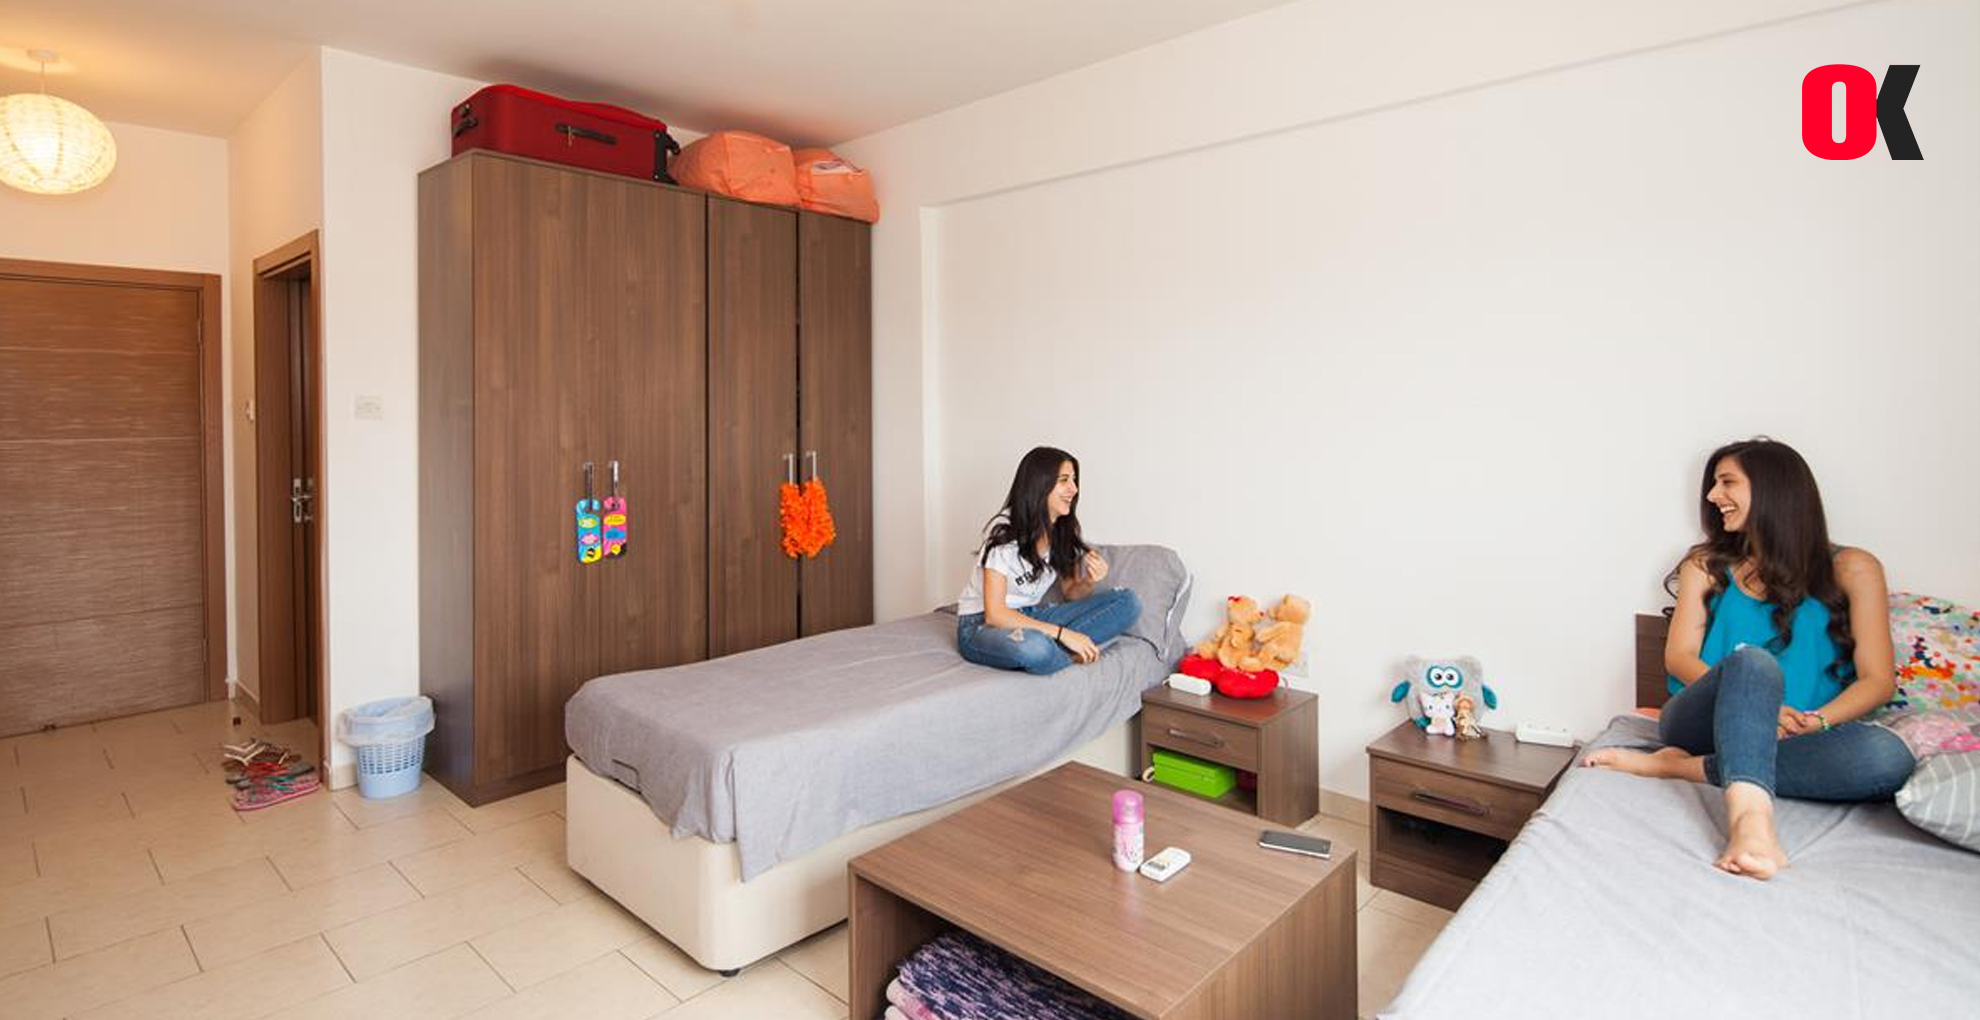 The Most Modern Student Dormitories in the World